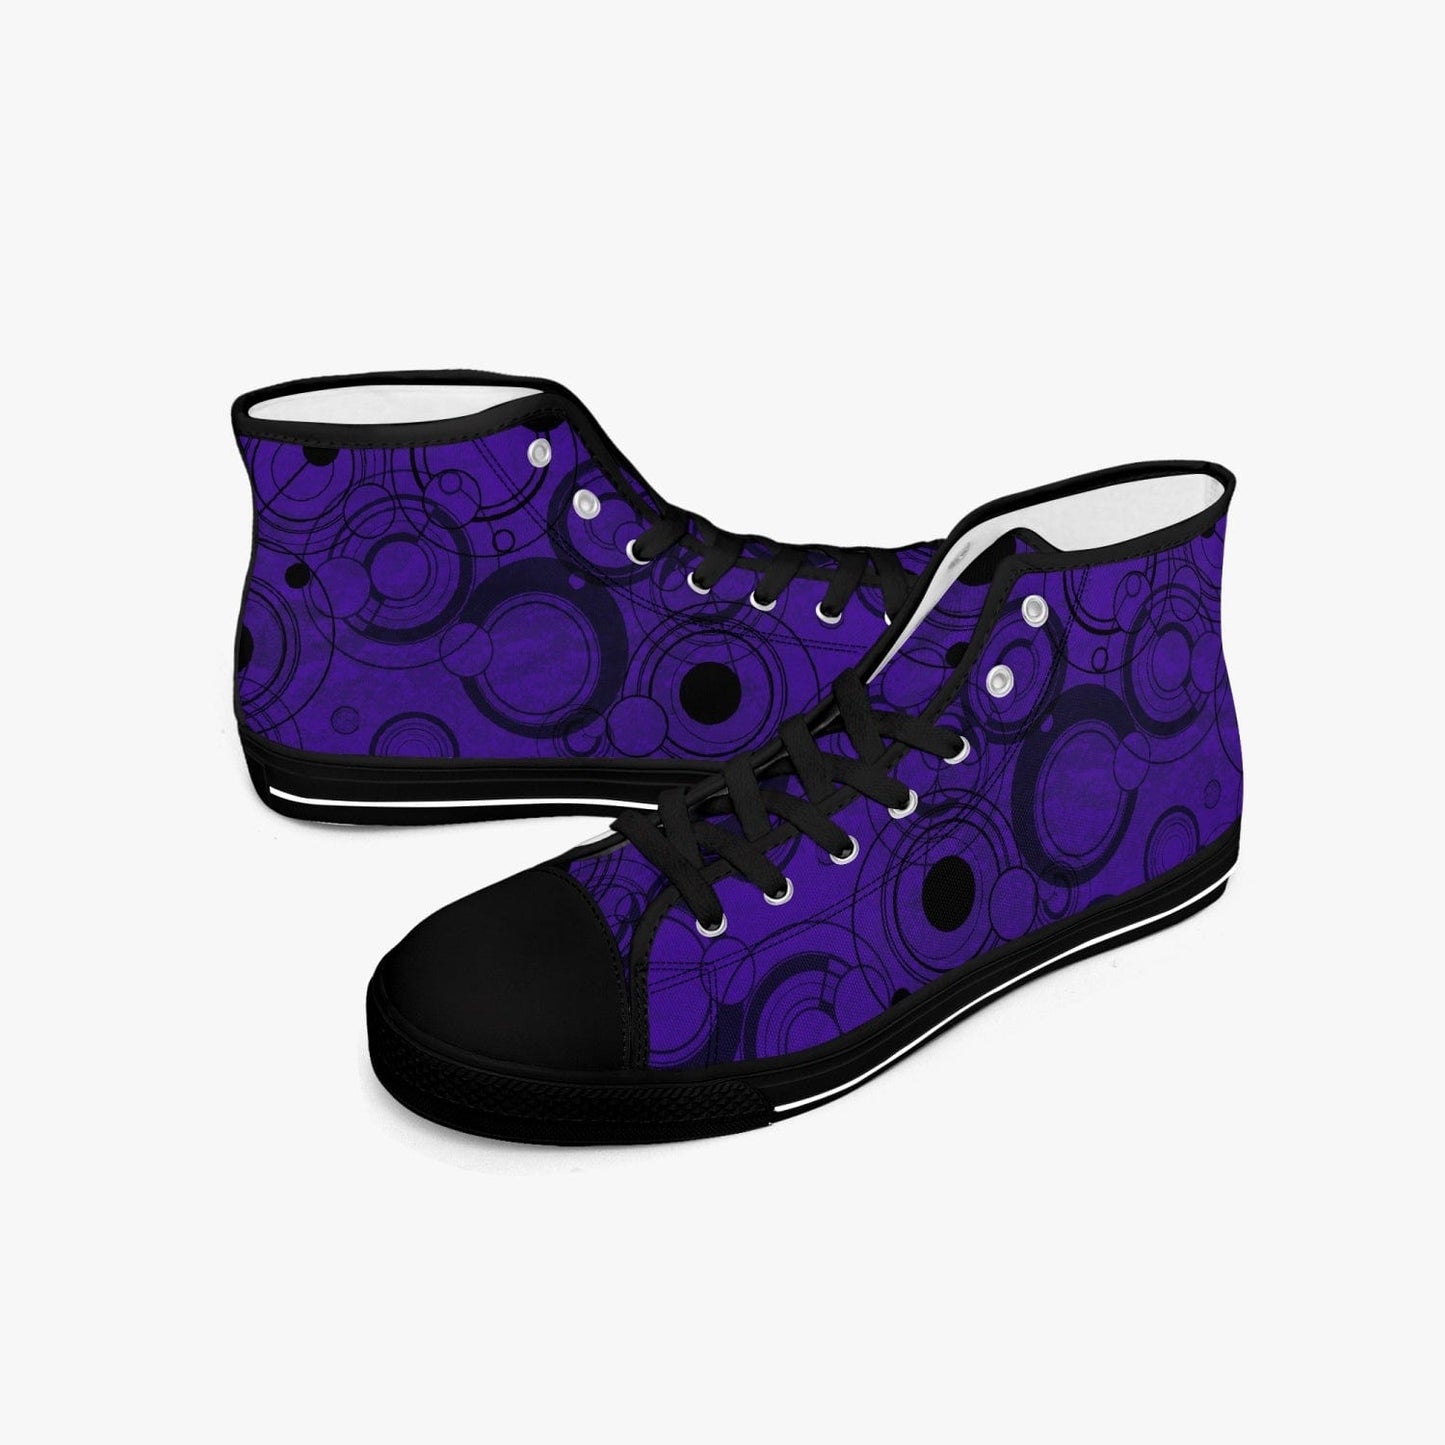 Women's Time Lord Gallifreyan Gallifrey language retro sneakers in a vivid gothic purple at Gallery Serpentine 1